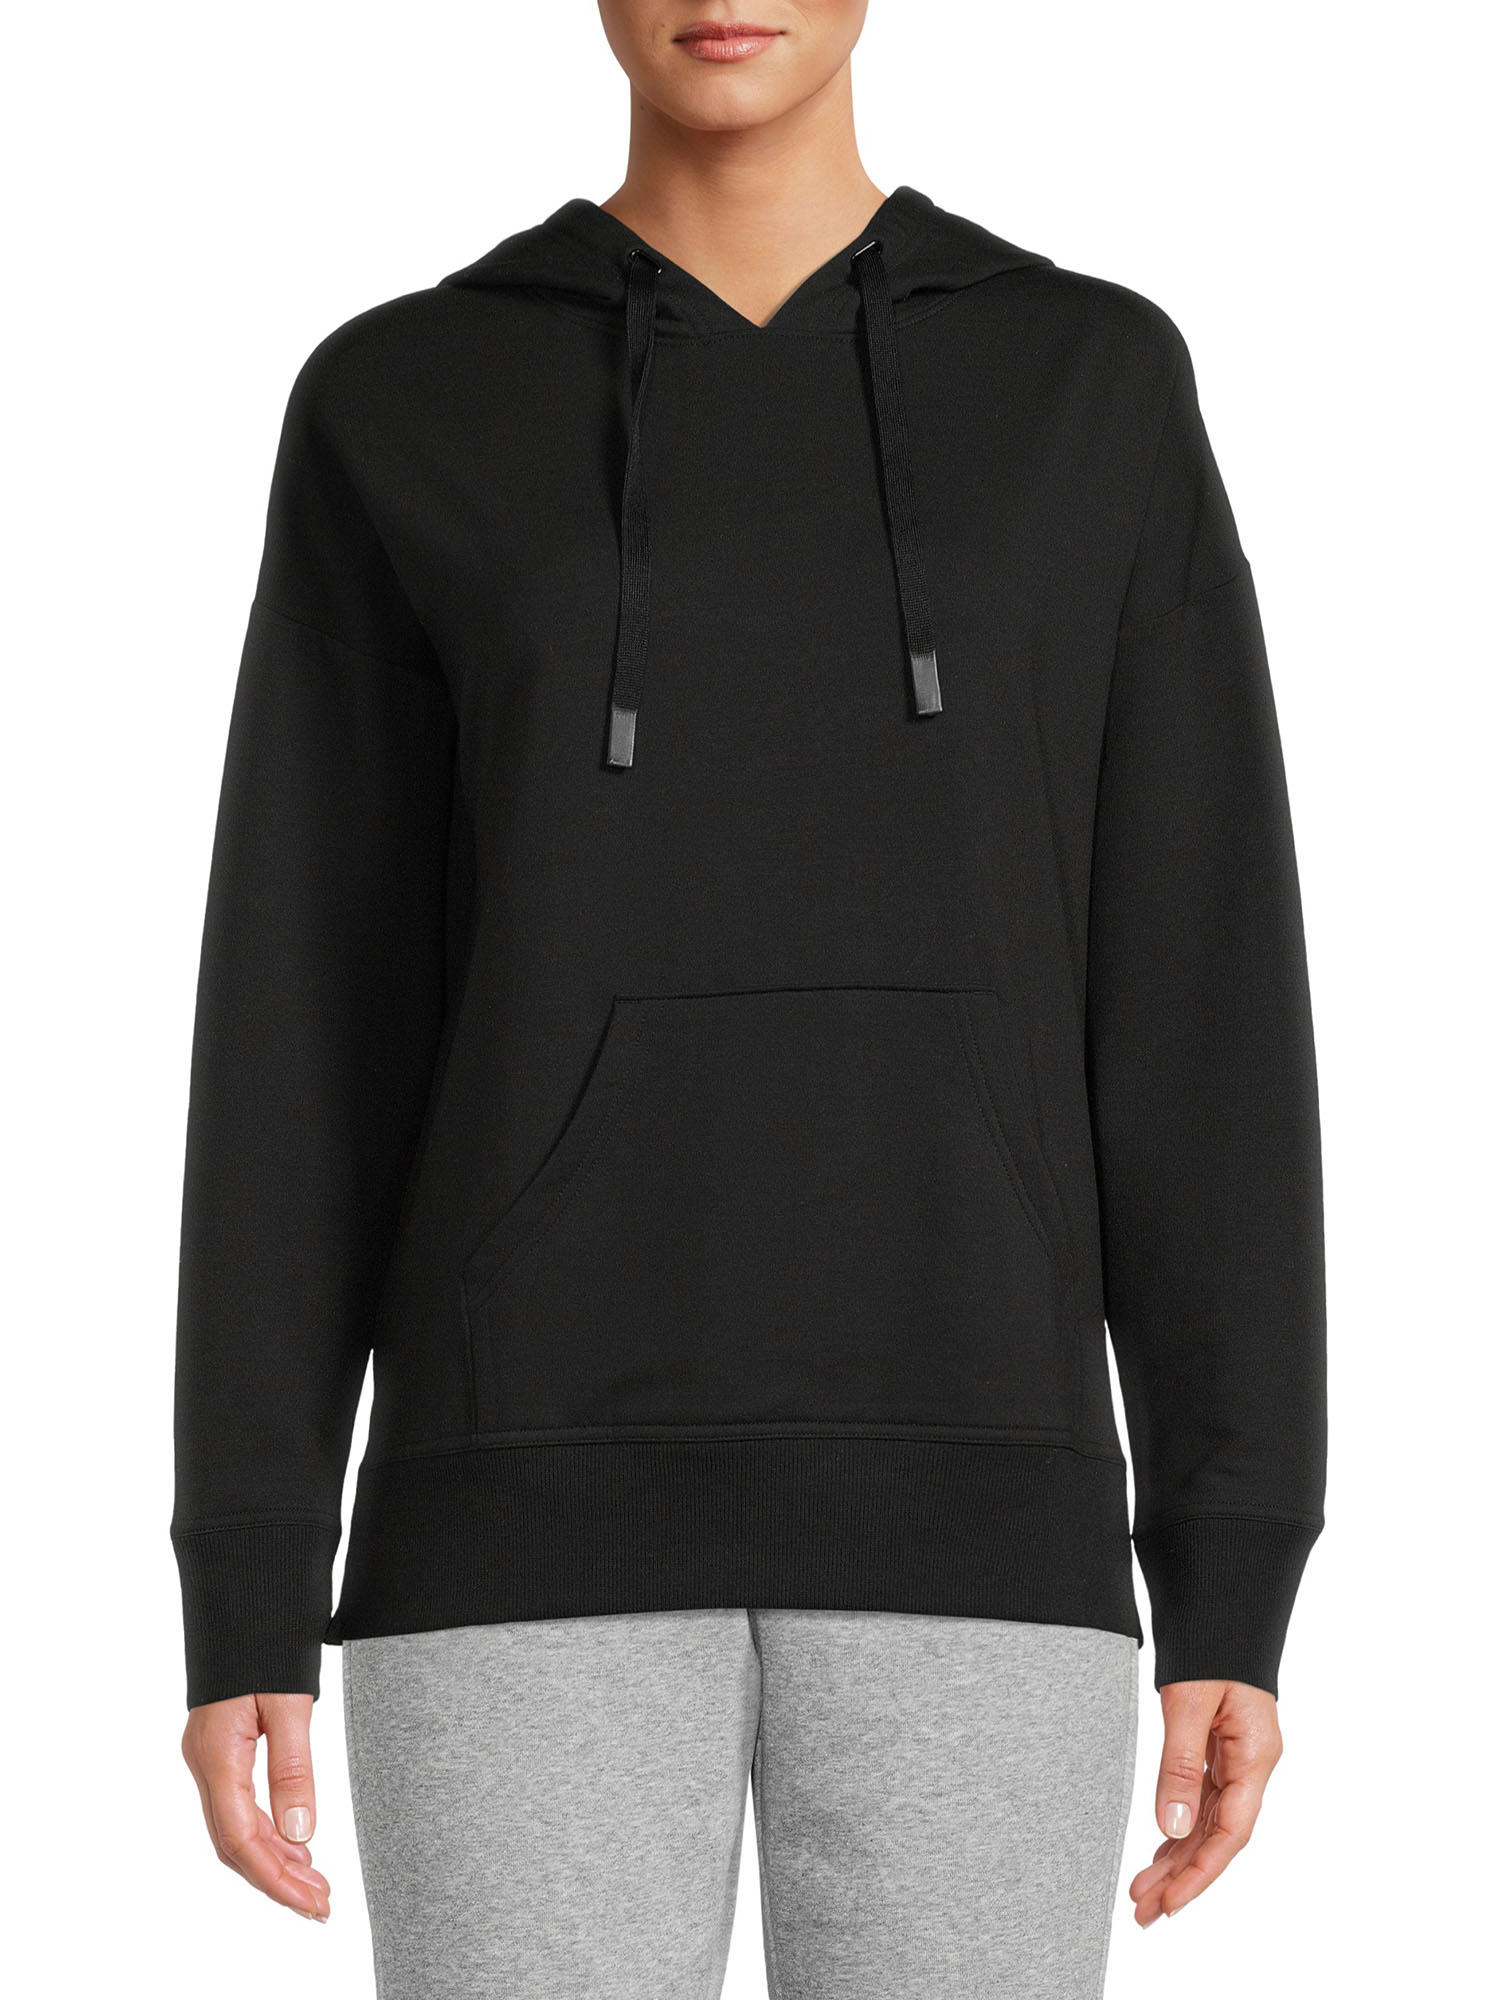 Athletic Works Women's Soft Hoodie With Front Pockets - Walmart.com